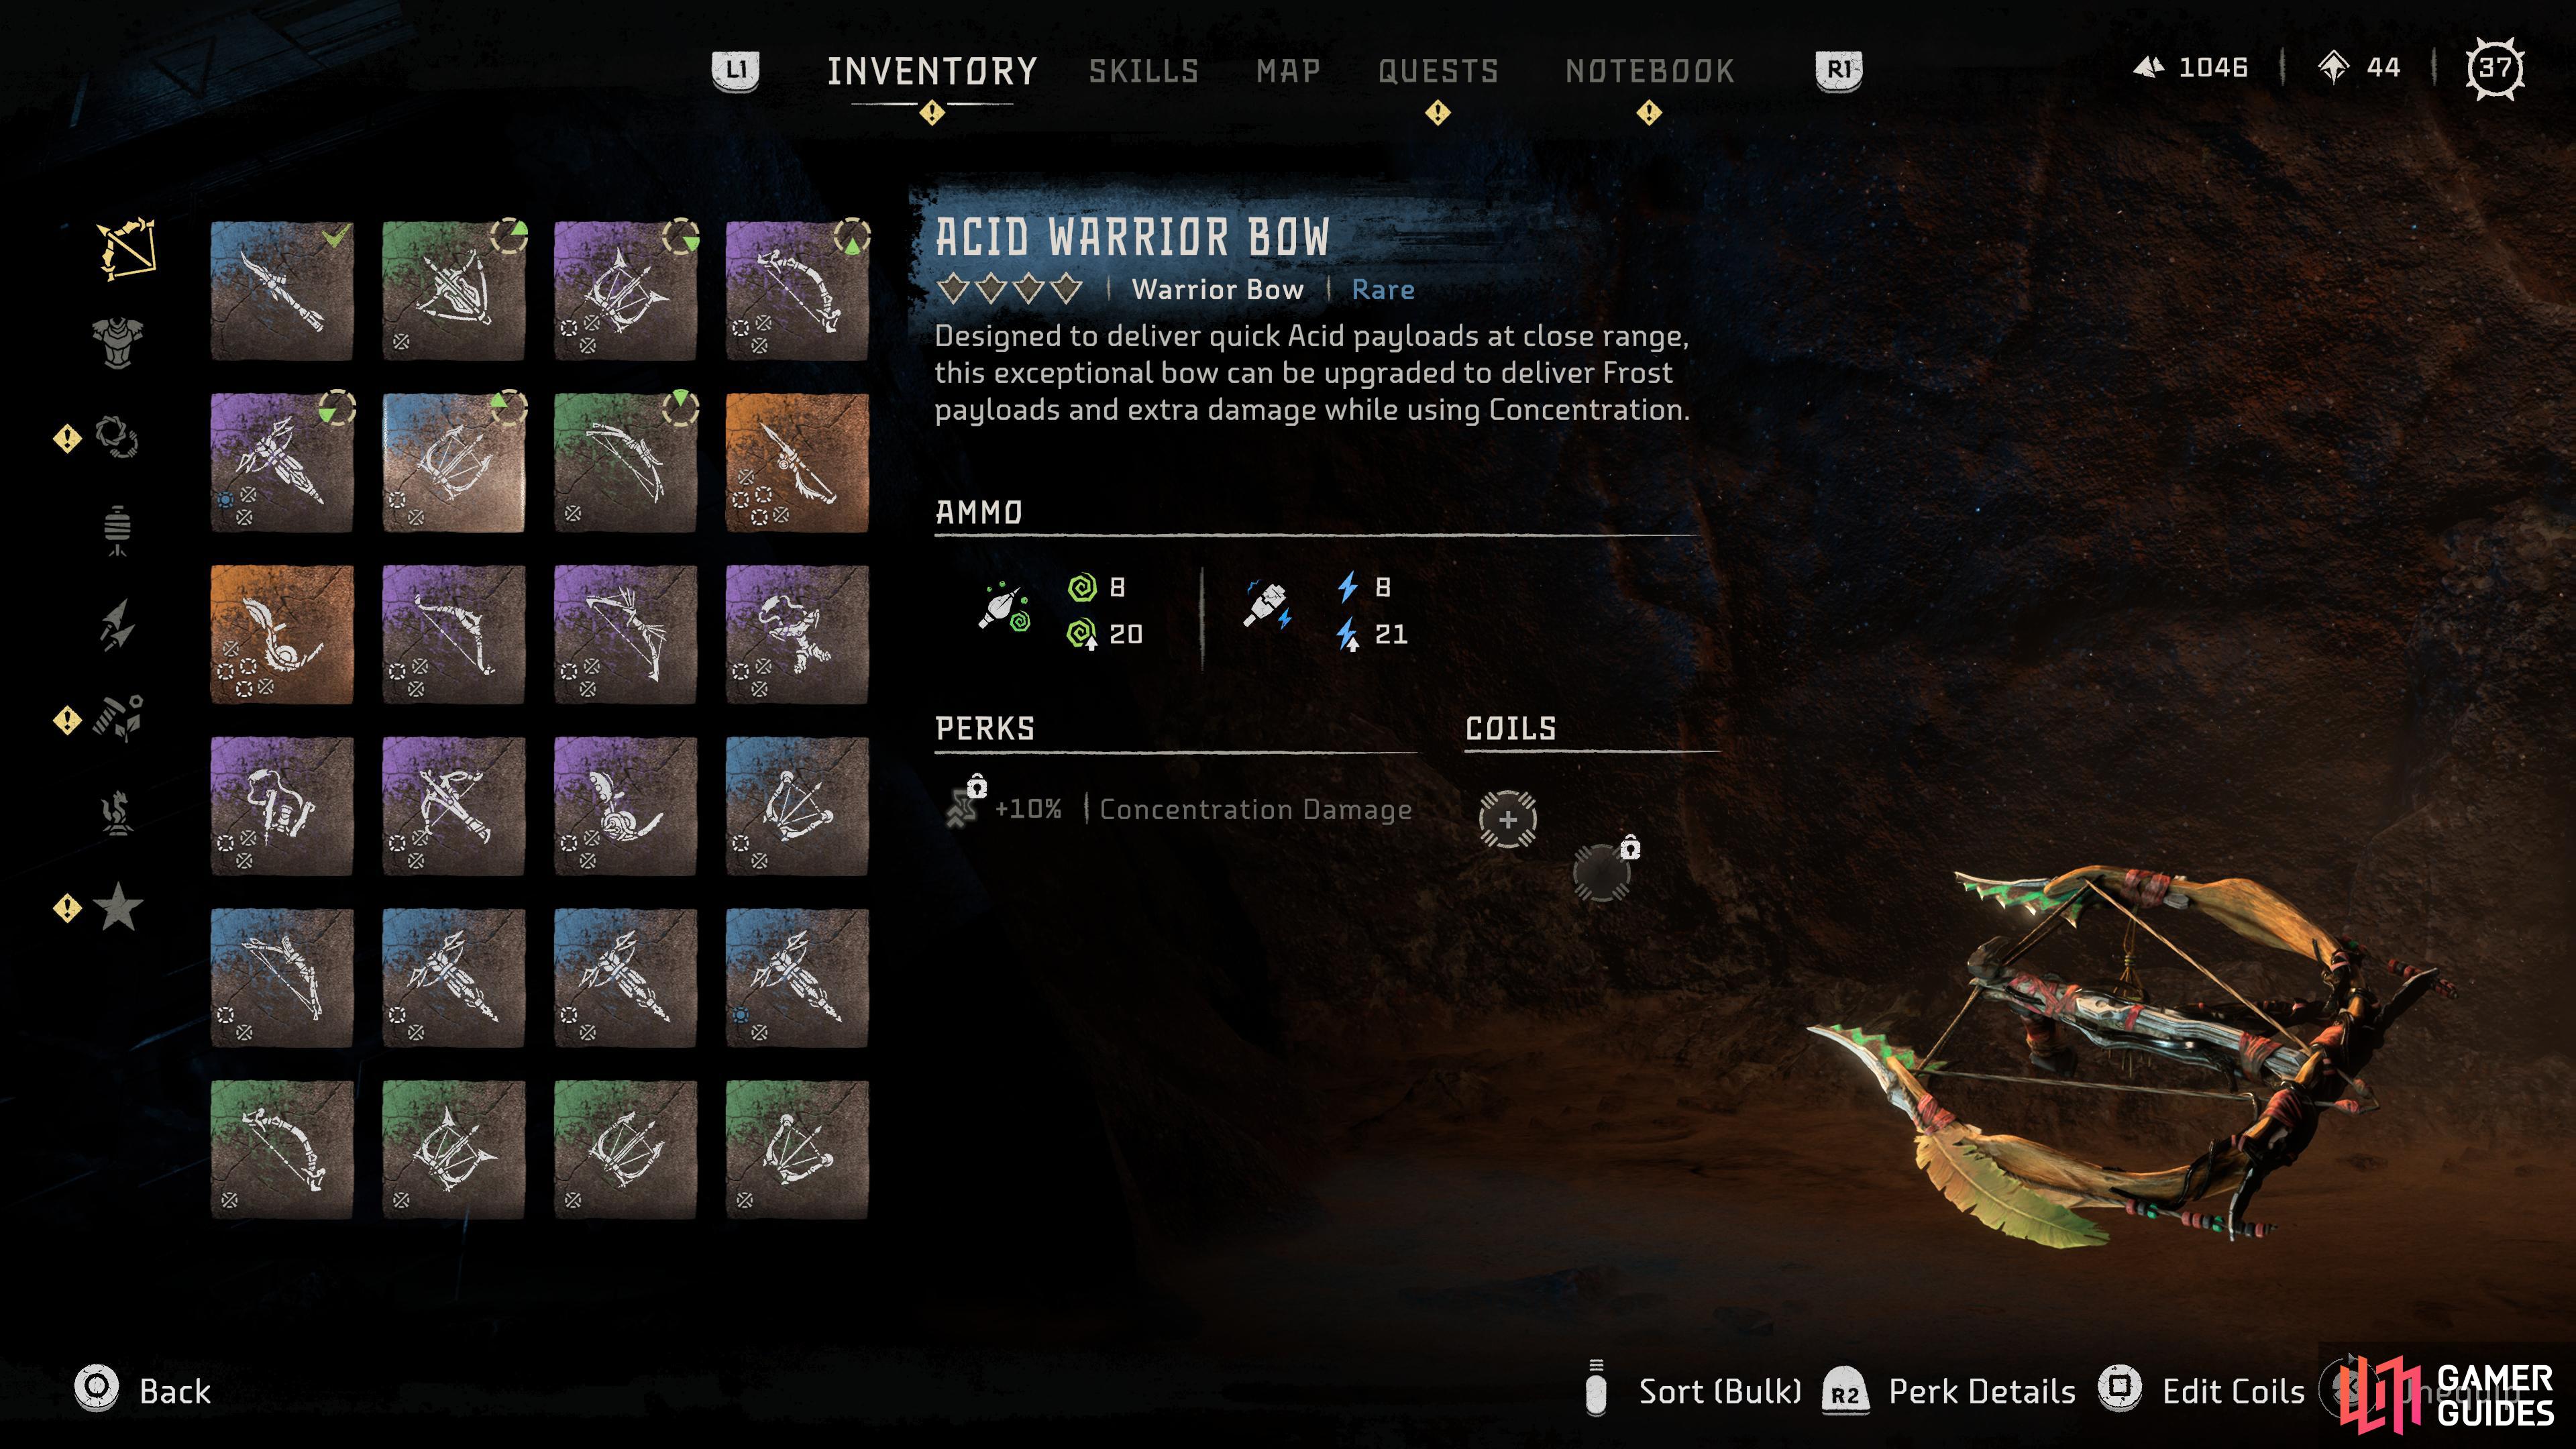 Overview of the Acid Warrior Bow.